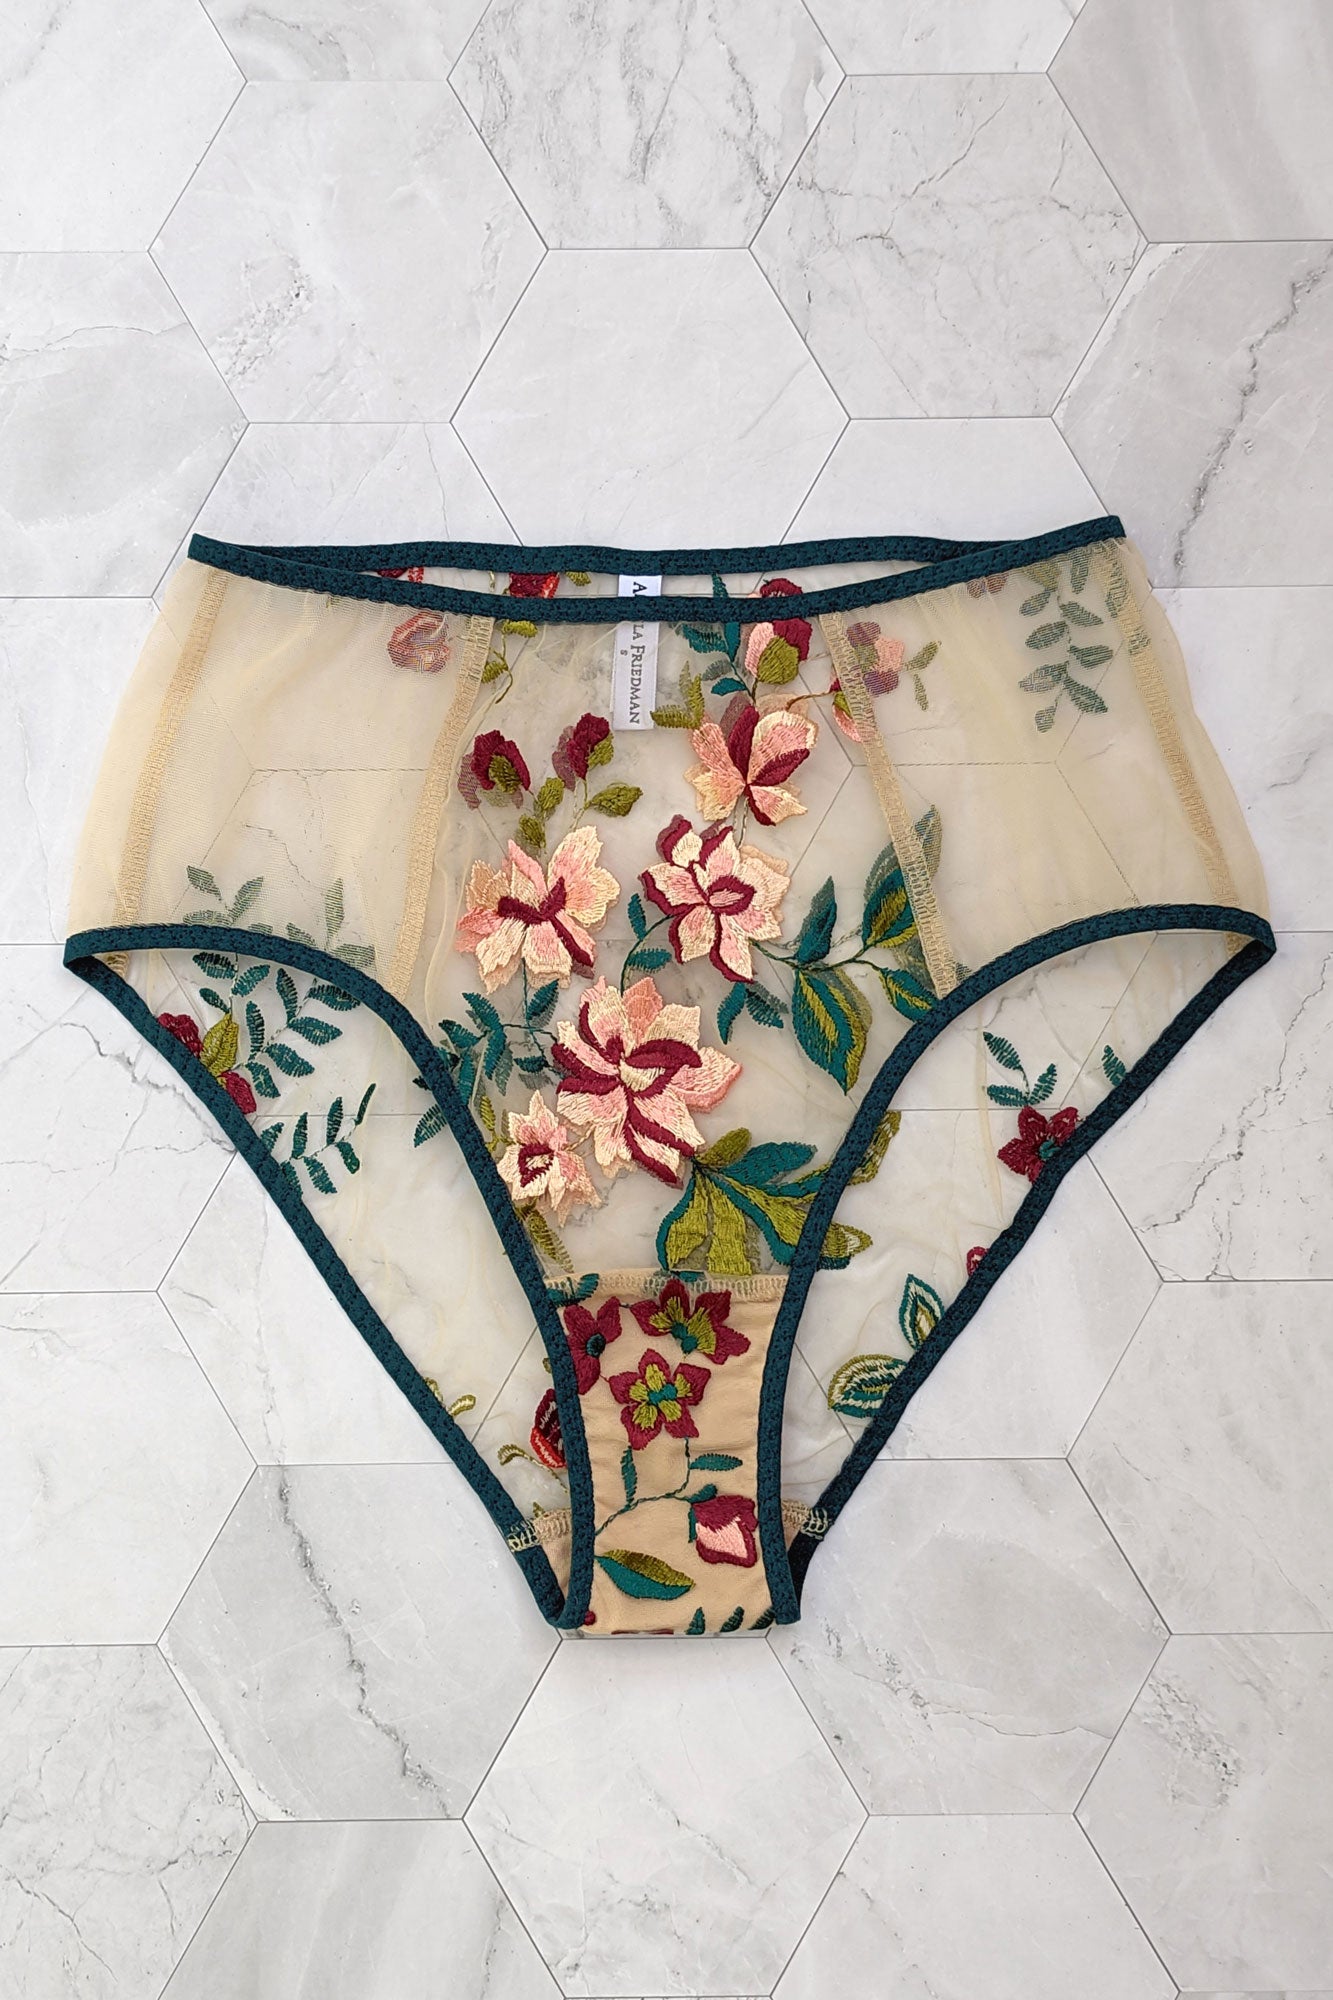 Floral knickers with sheer nude panels and colorful embroidery